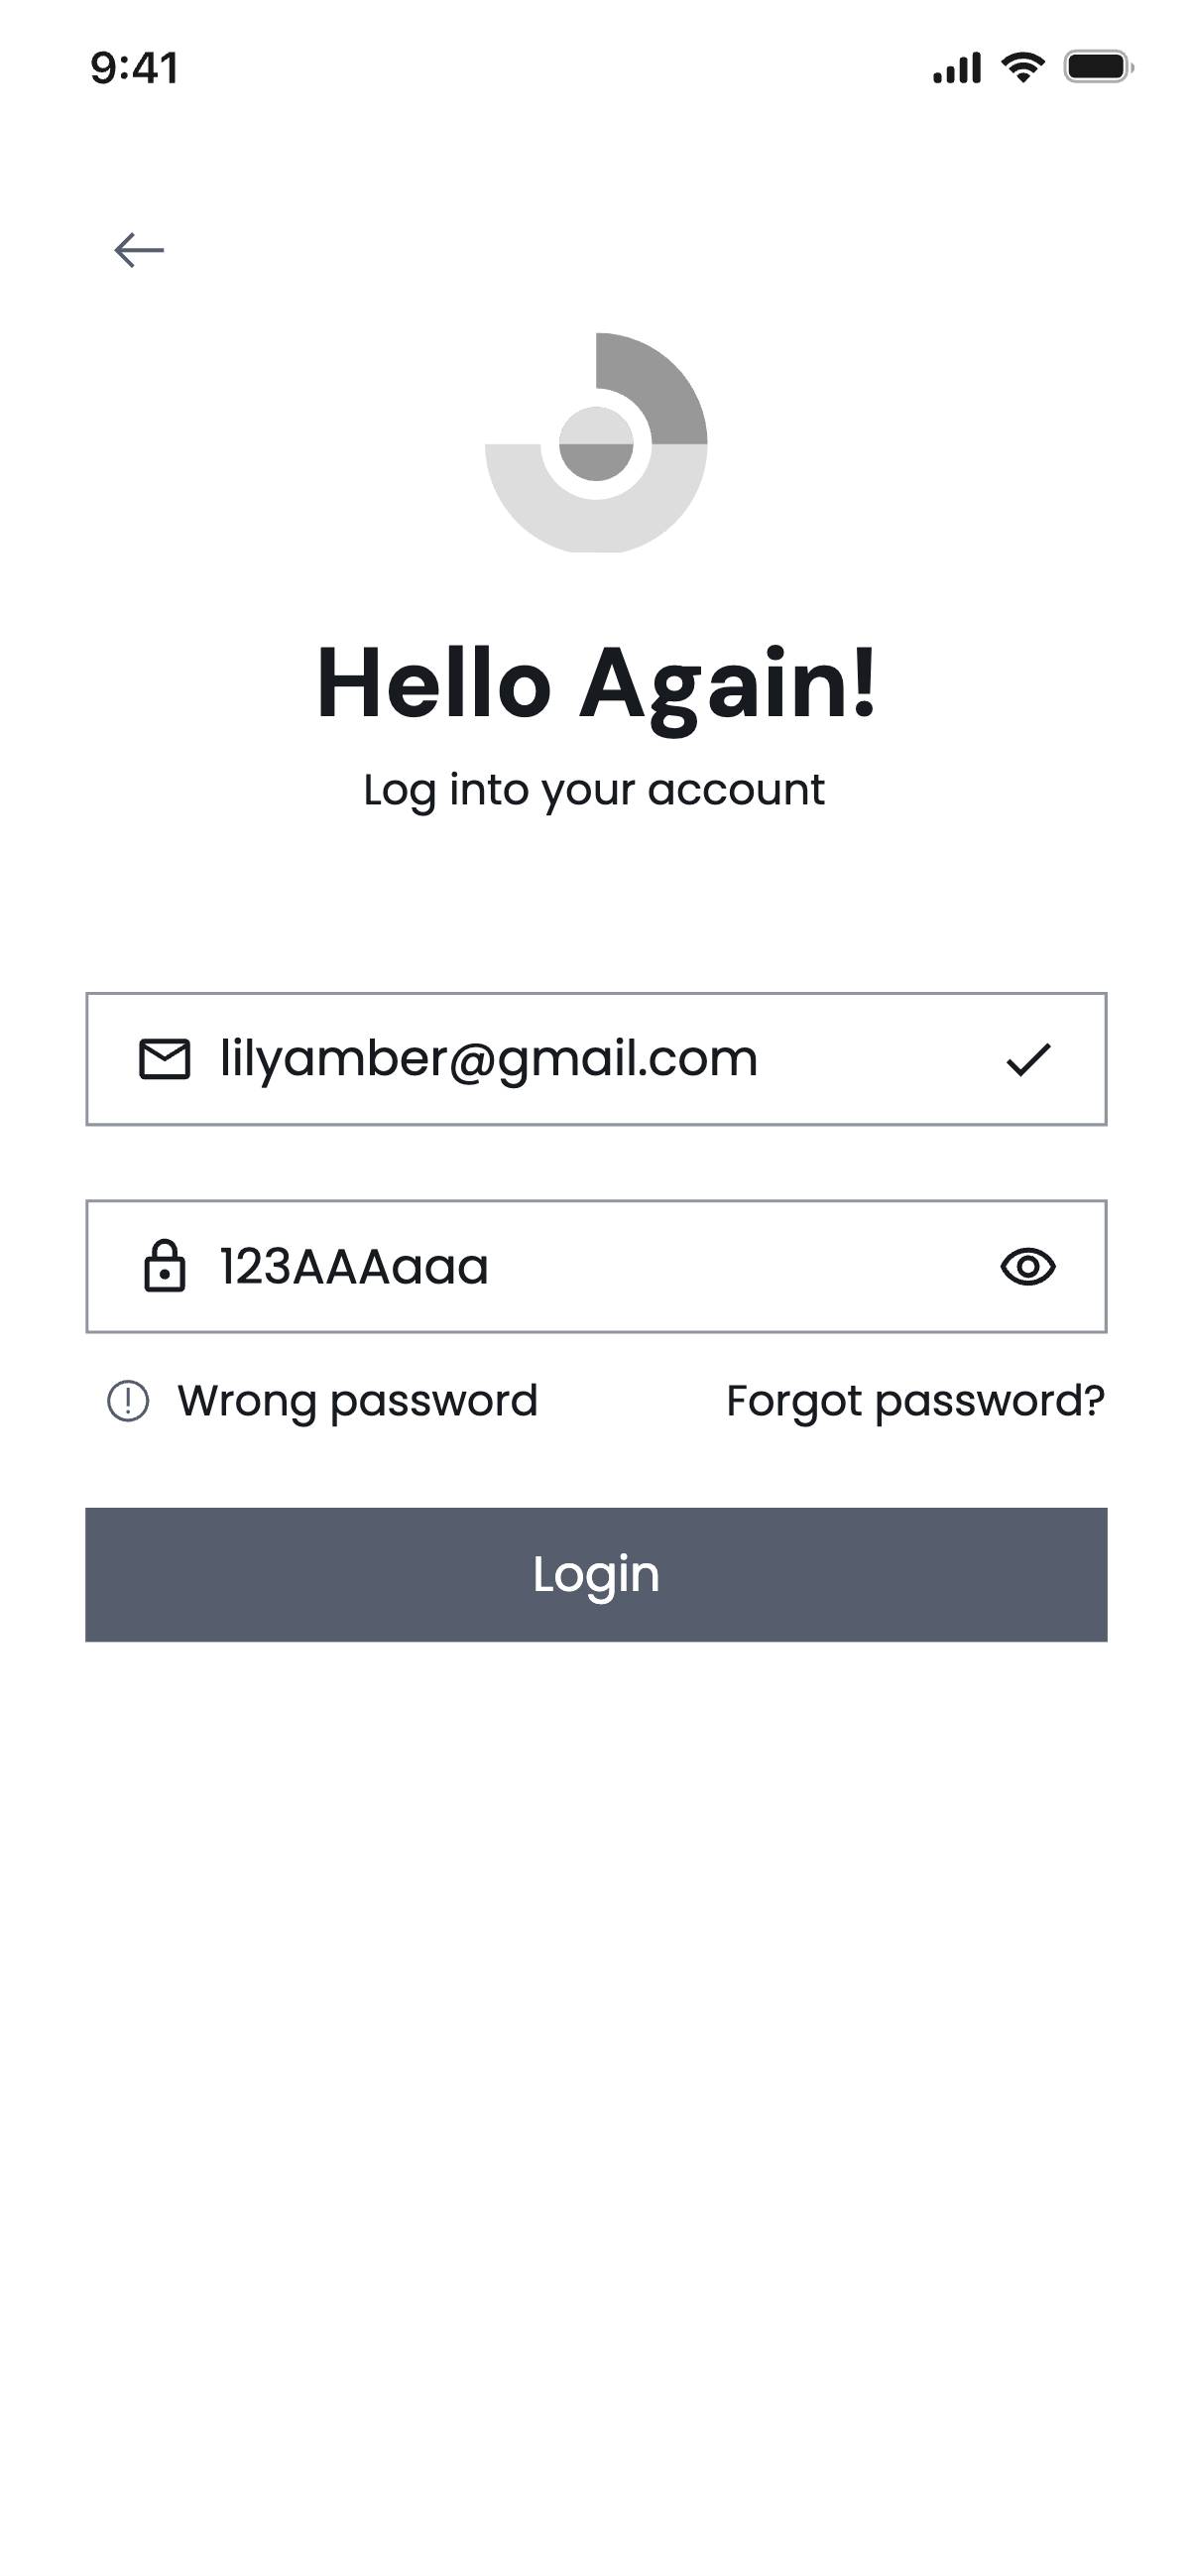 Sign in with email - Wrong password